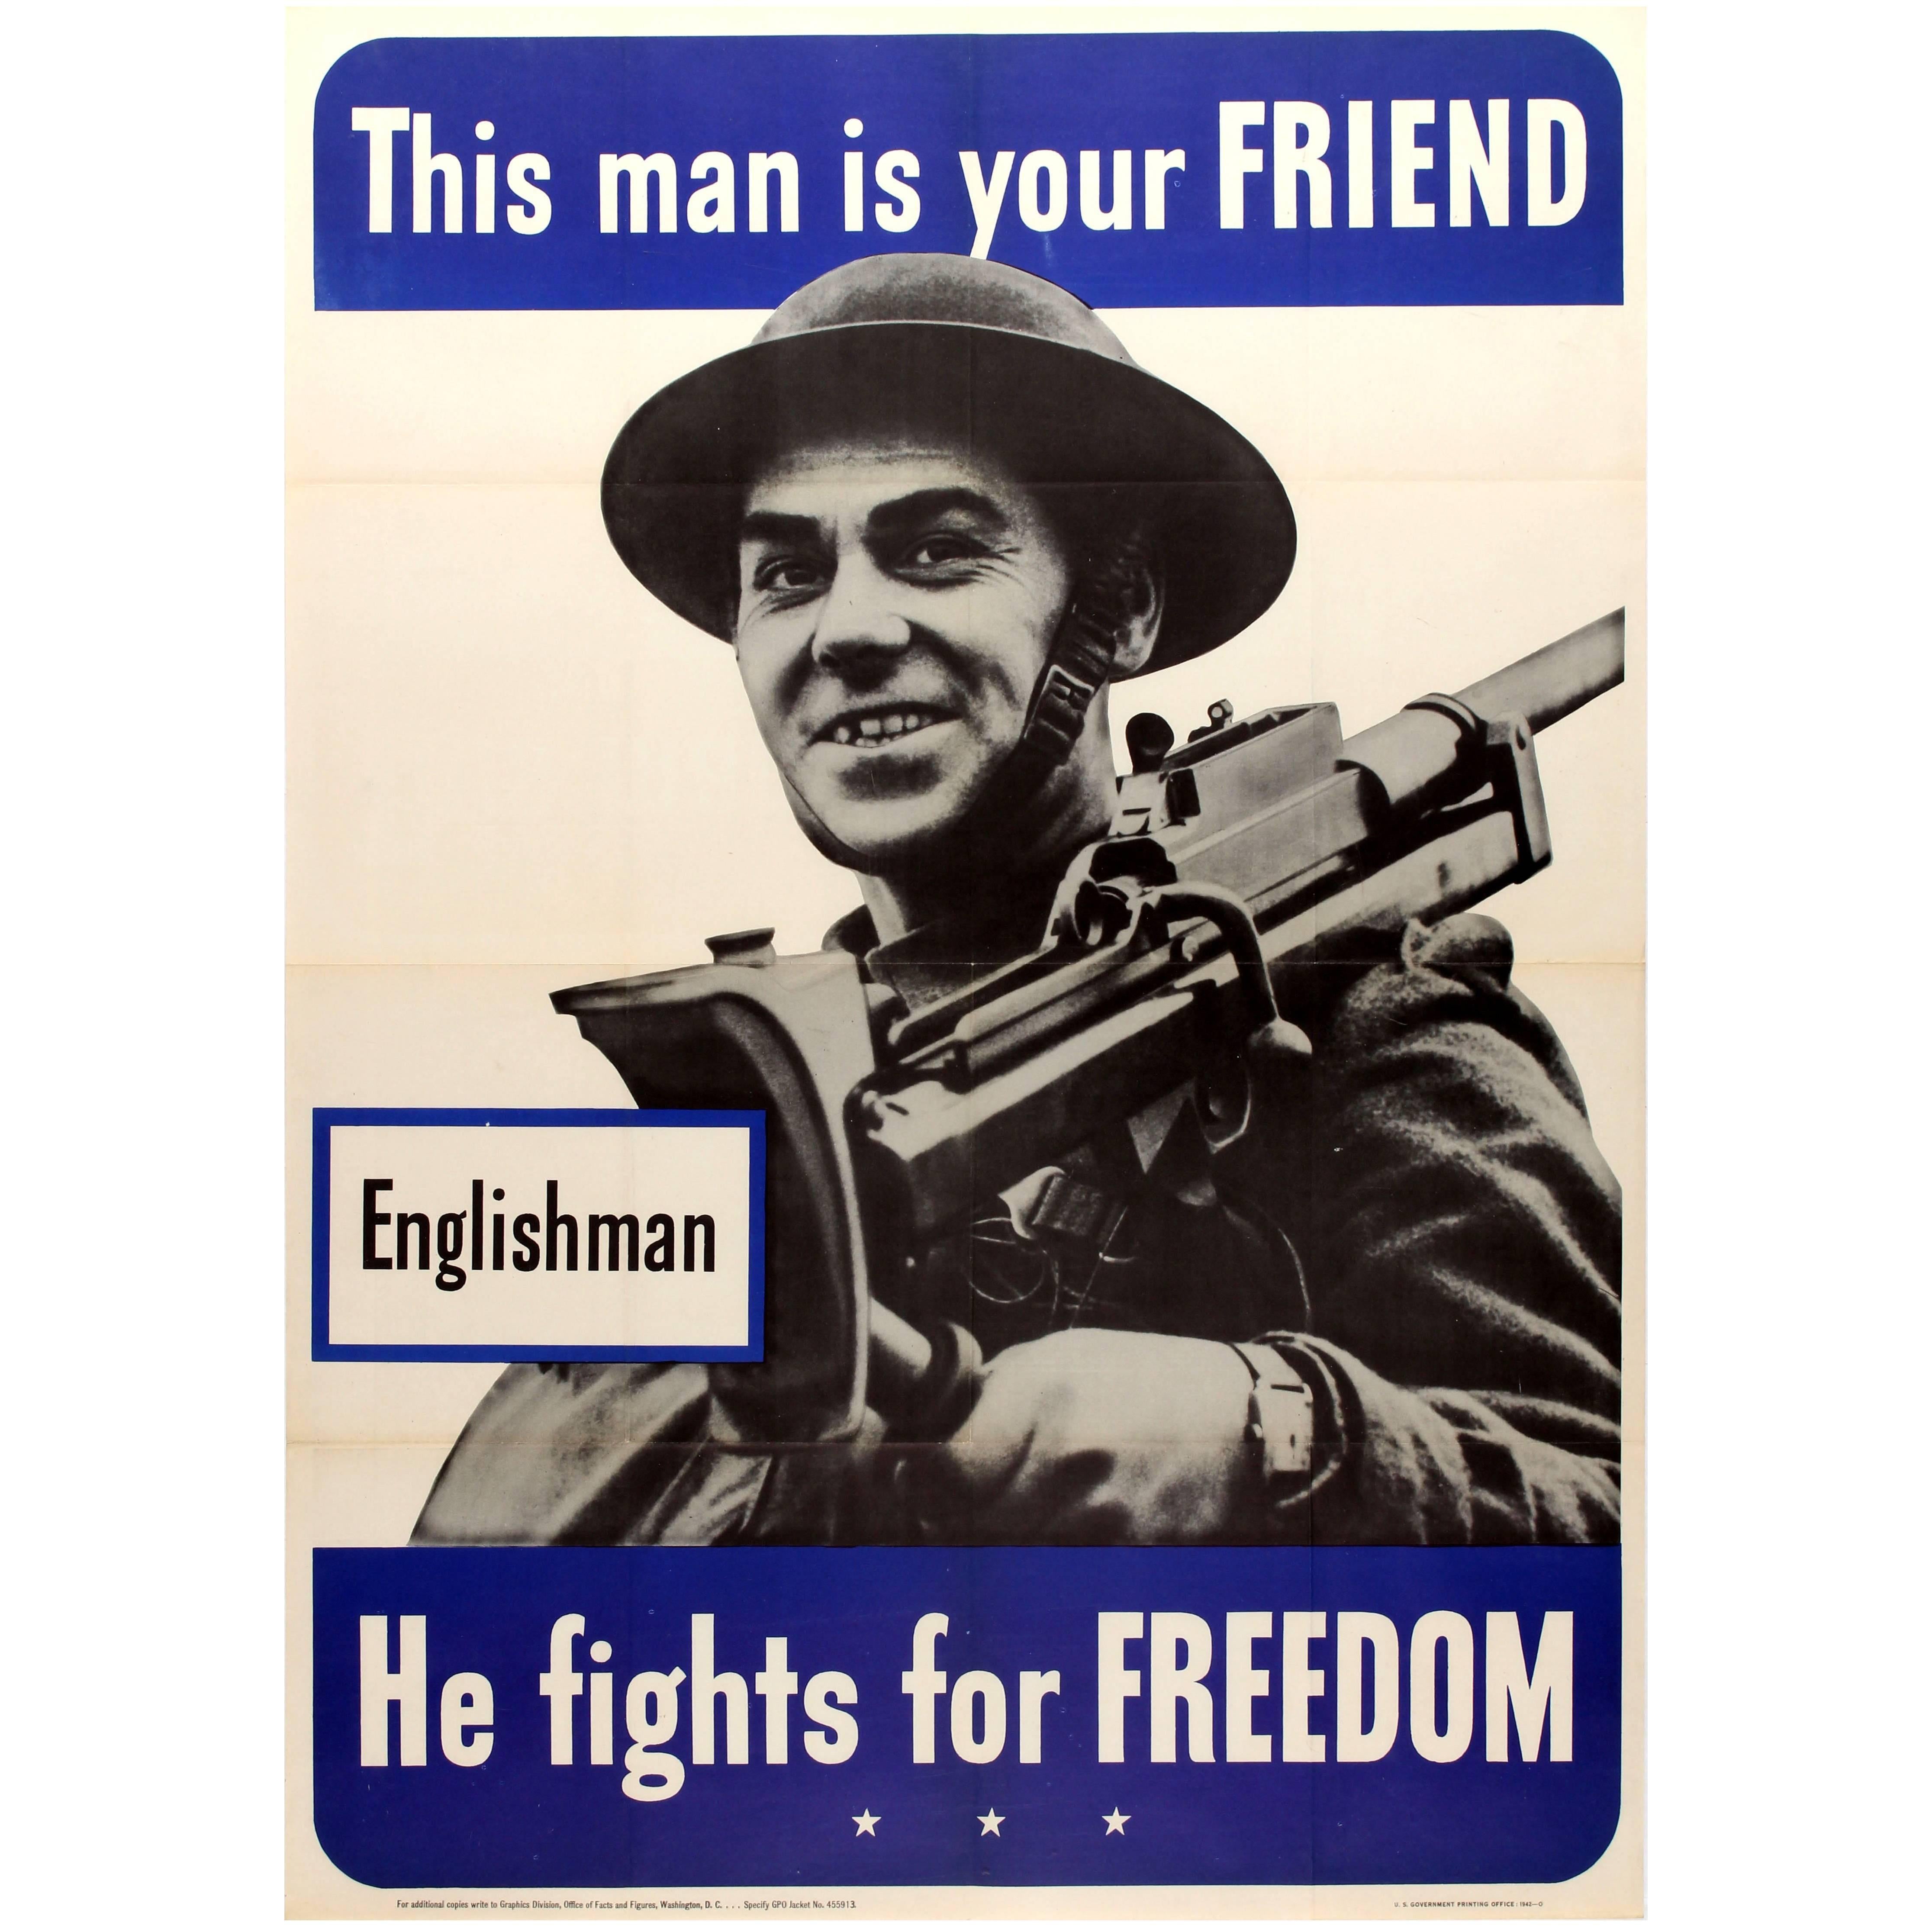 Original WW2 Poster, Englishman, This Man Is Your Friend, He Fights for Freedom